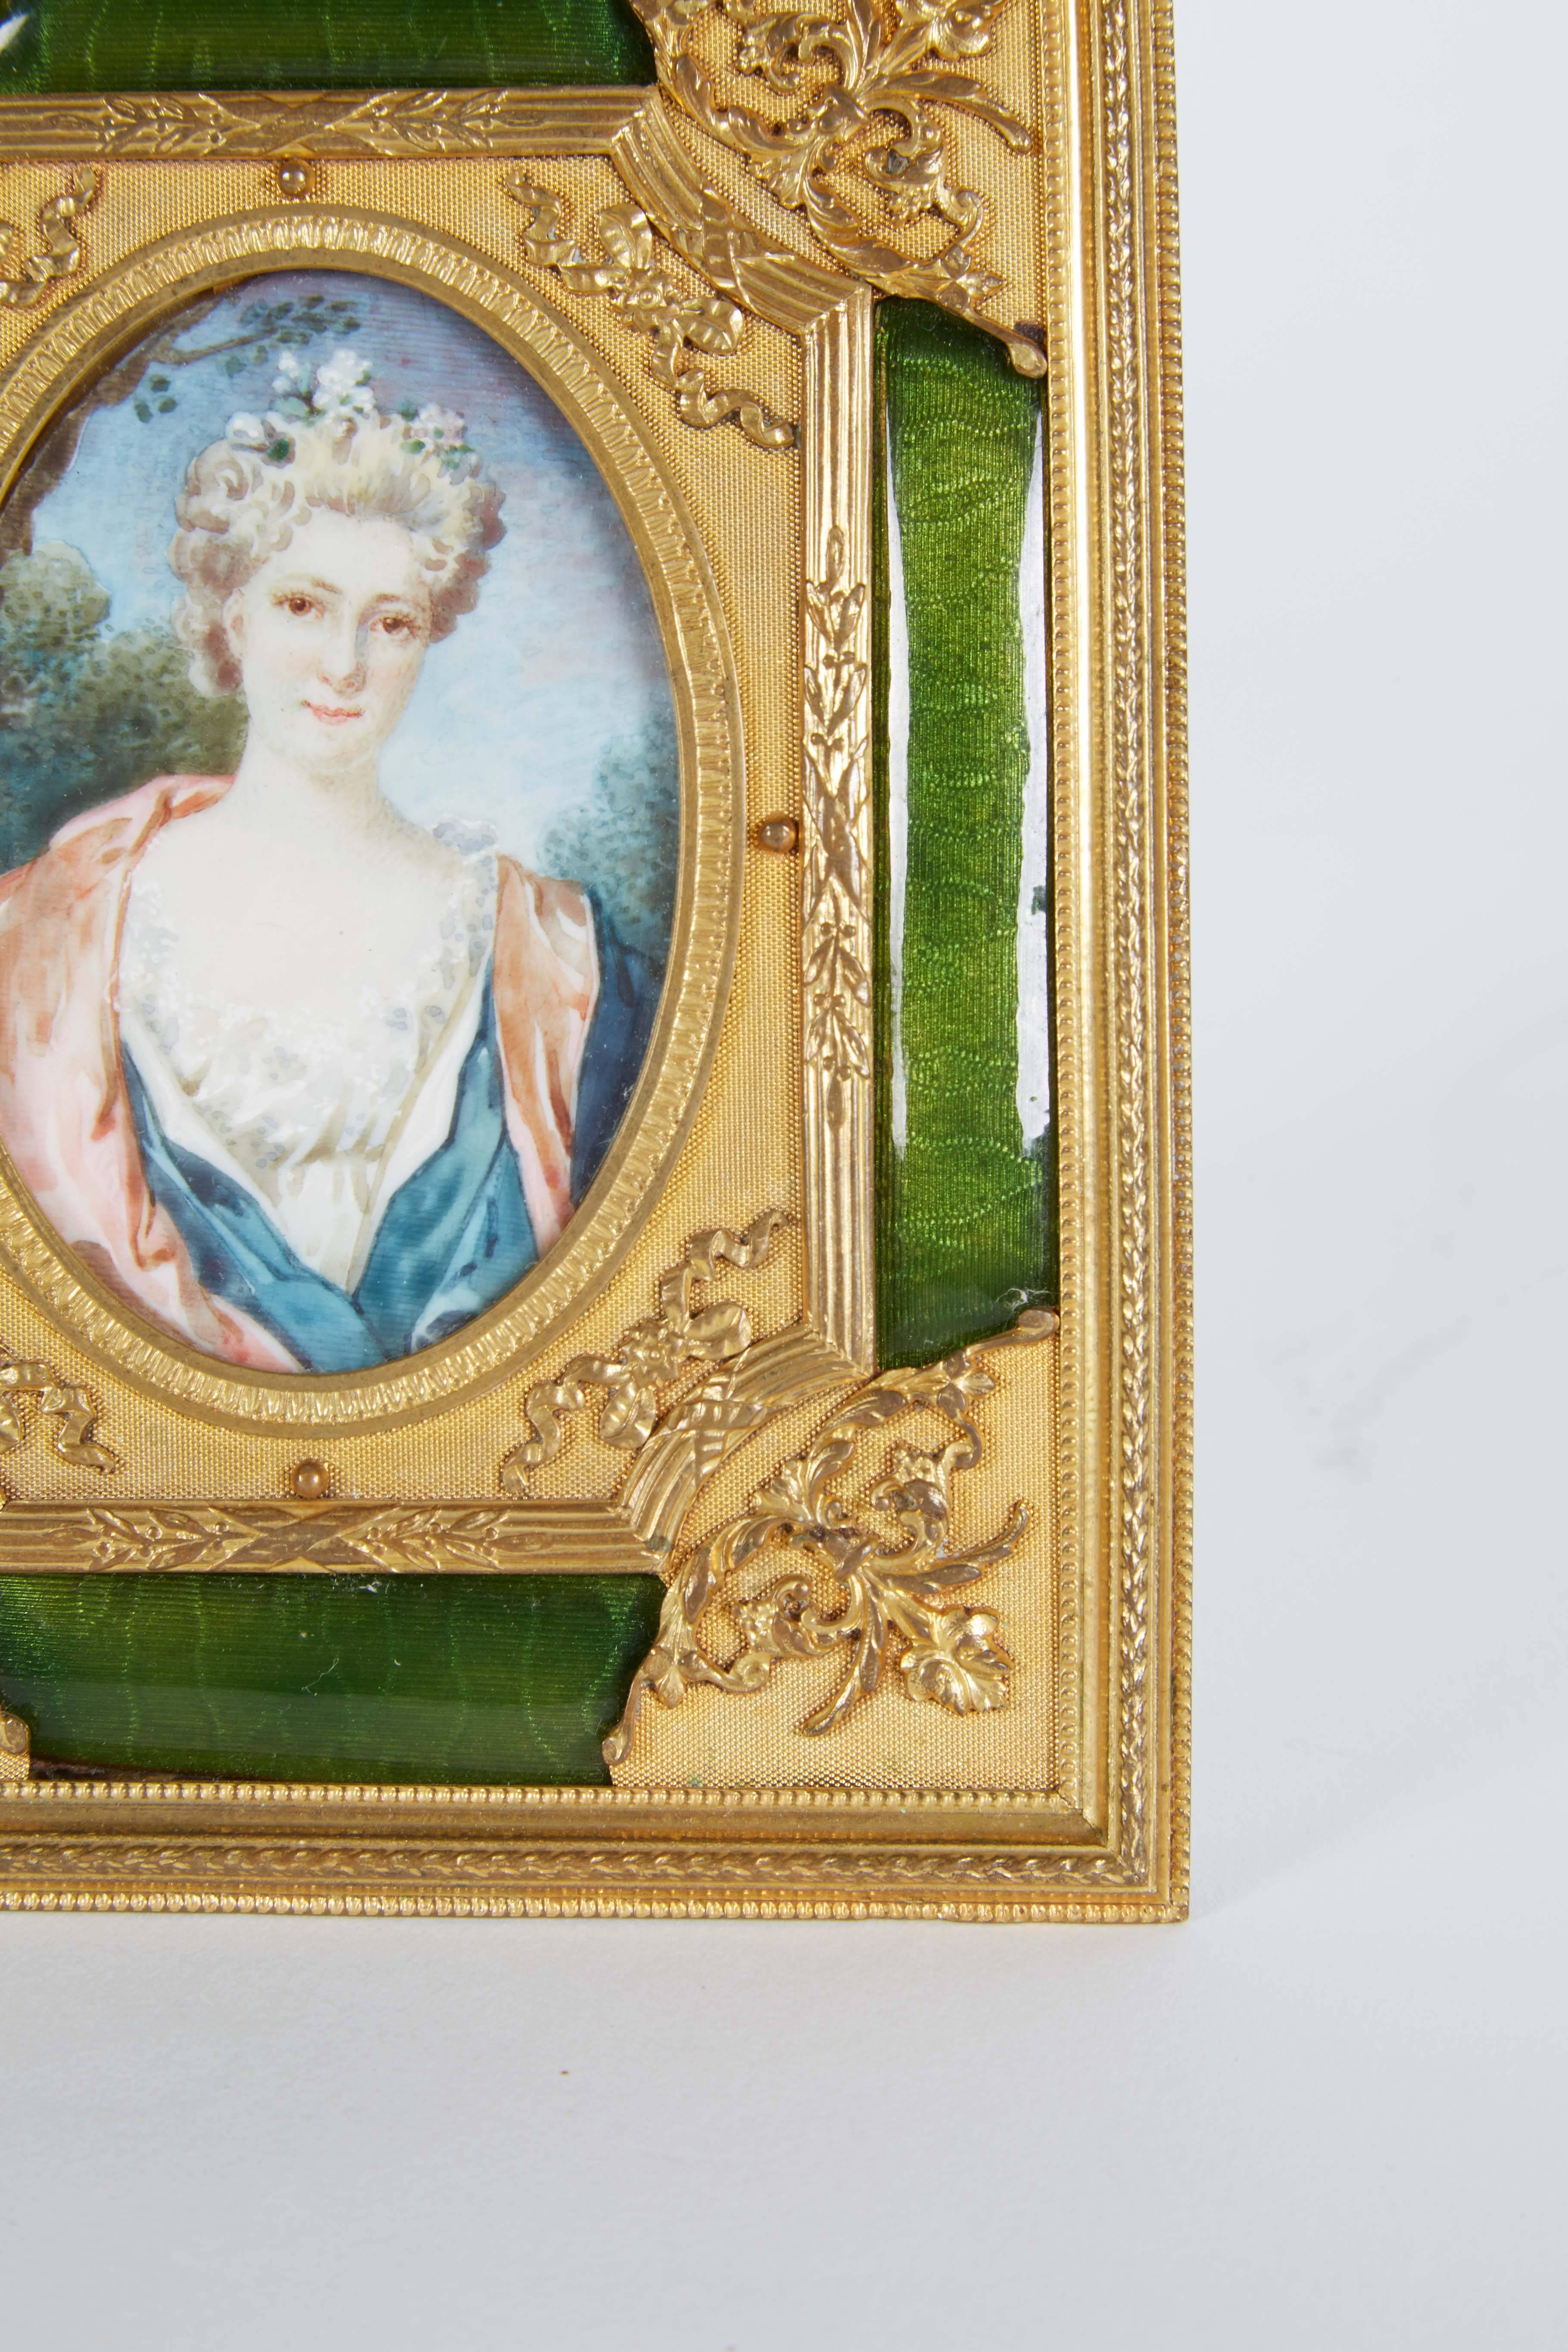 19th Century French Gilt Bronze Ormolu and Green Guilloche Enamel Picture Photo Frame